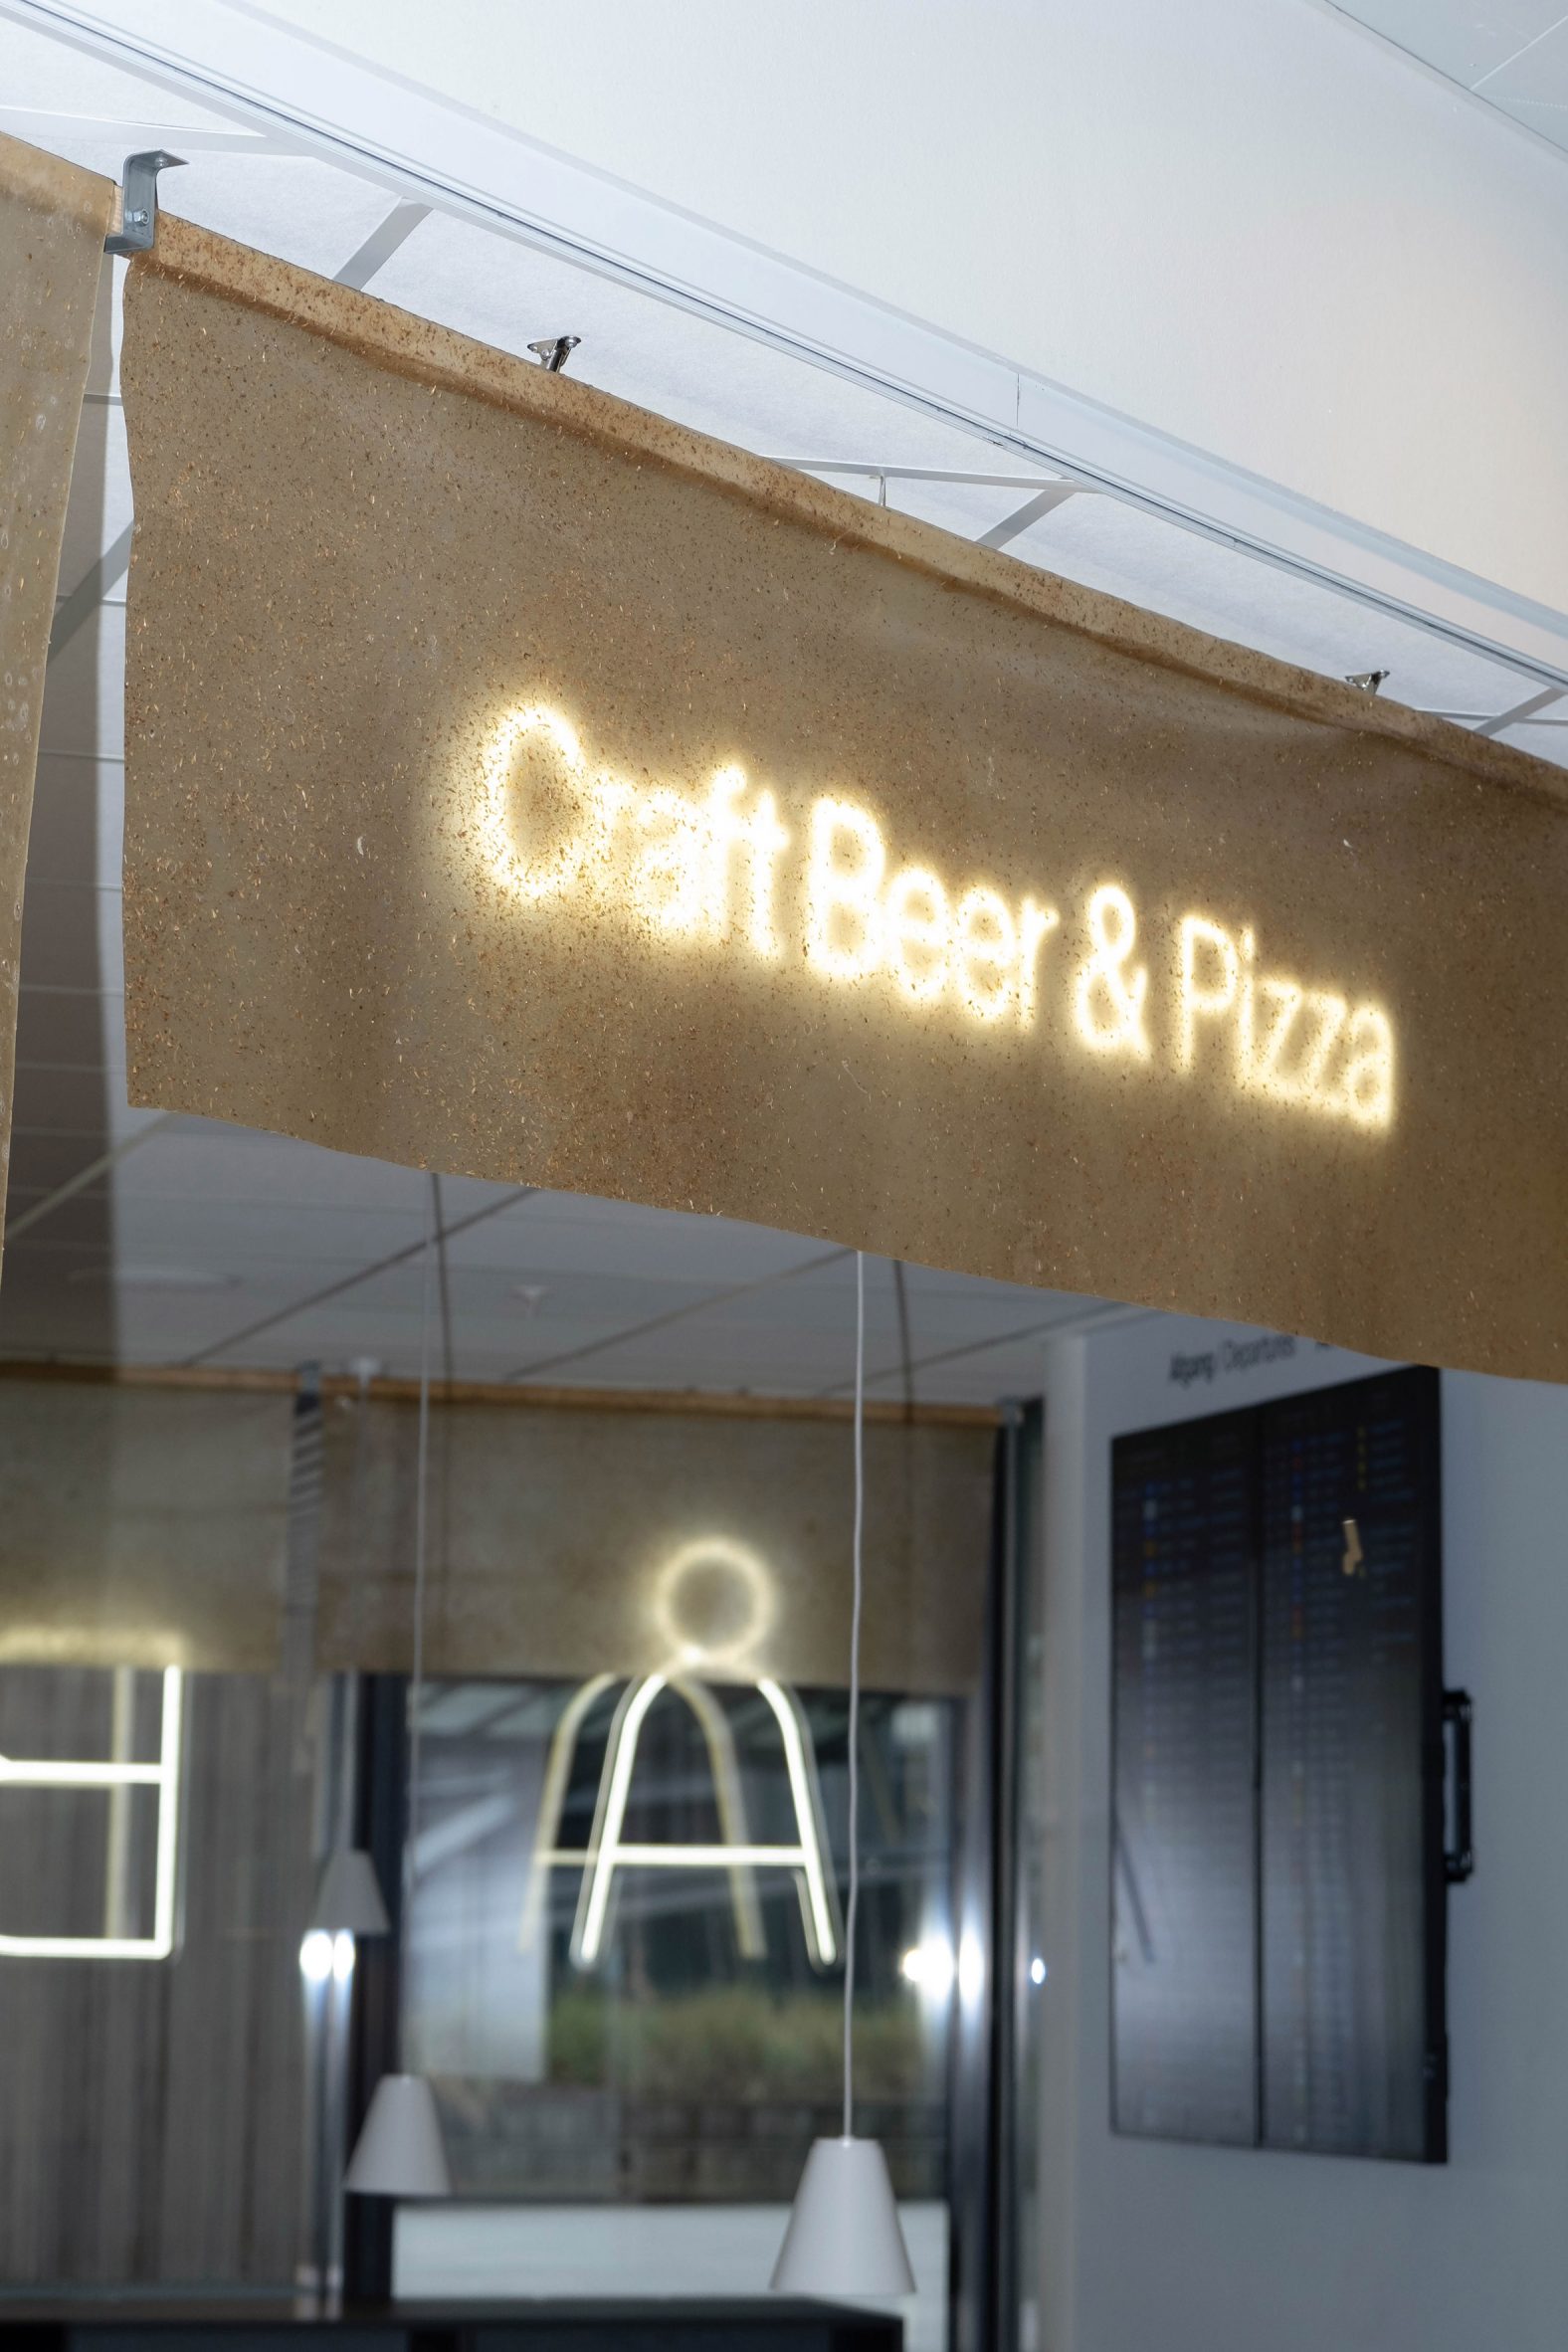 Beer-based panels illuminated with a craft beer sign